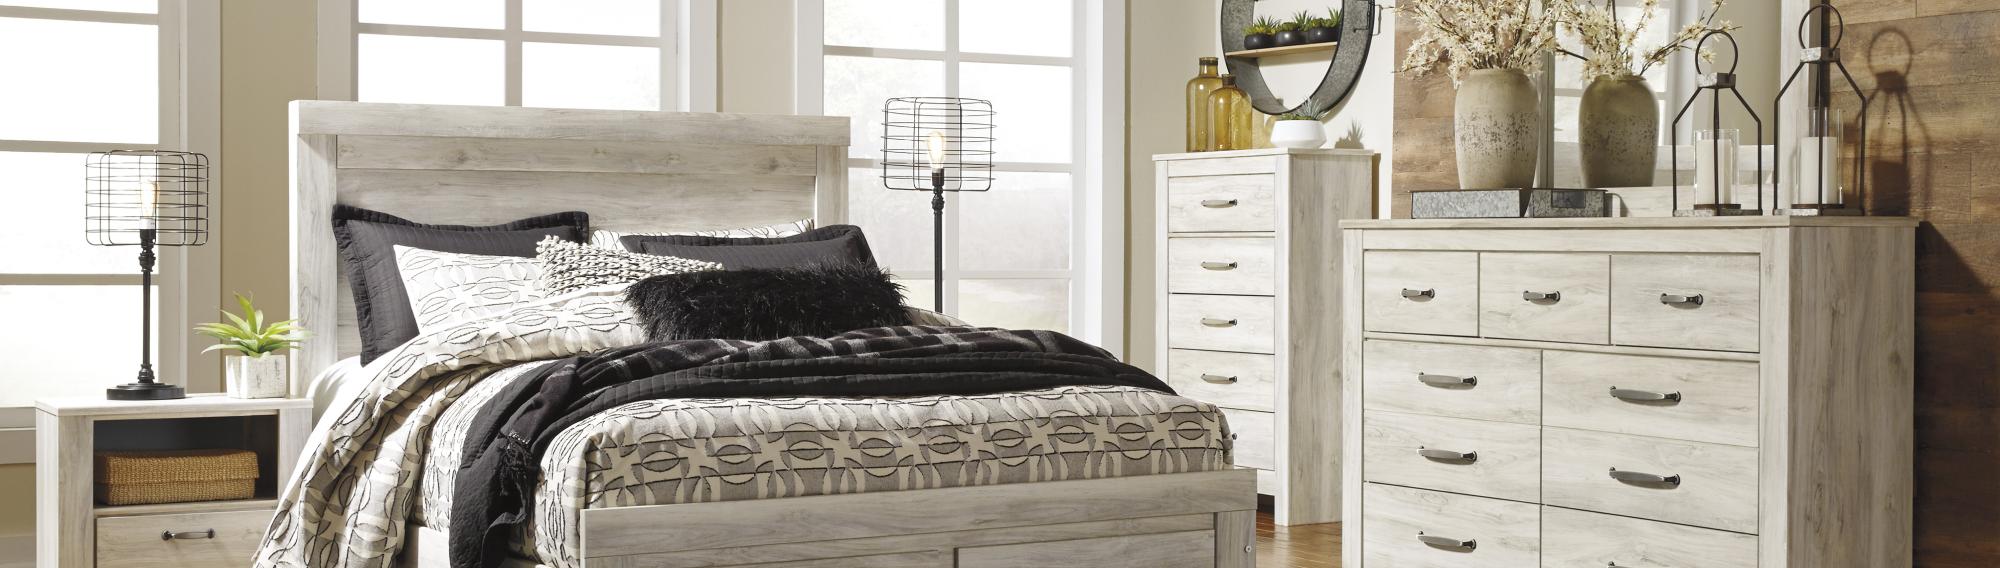 Image of a fully furnished bedroom with an affordable adult bed